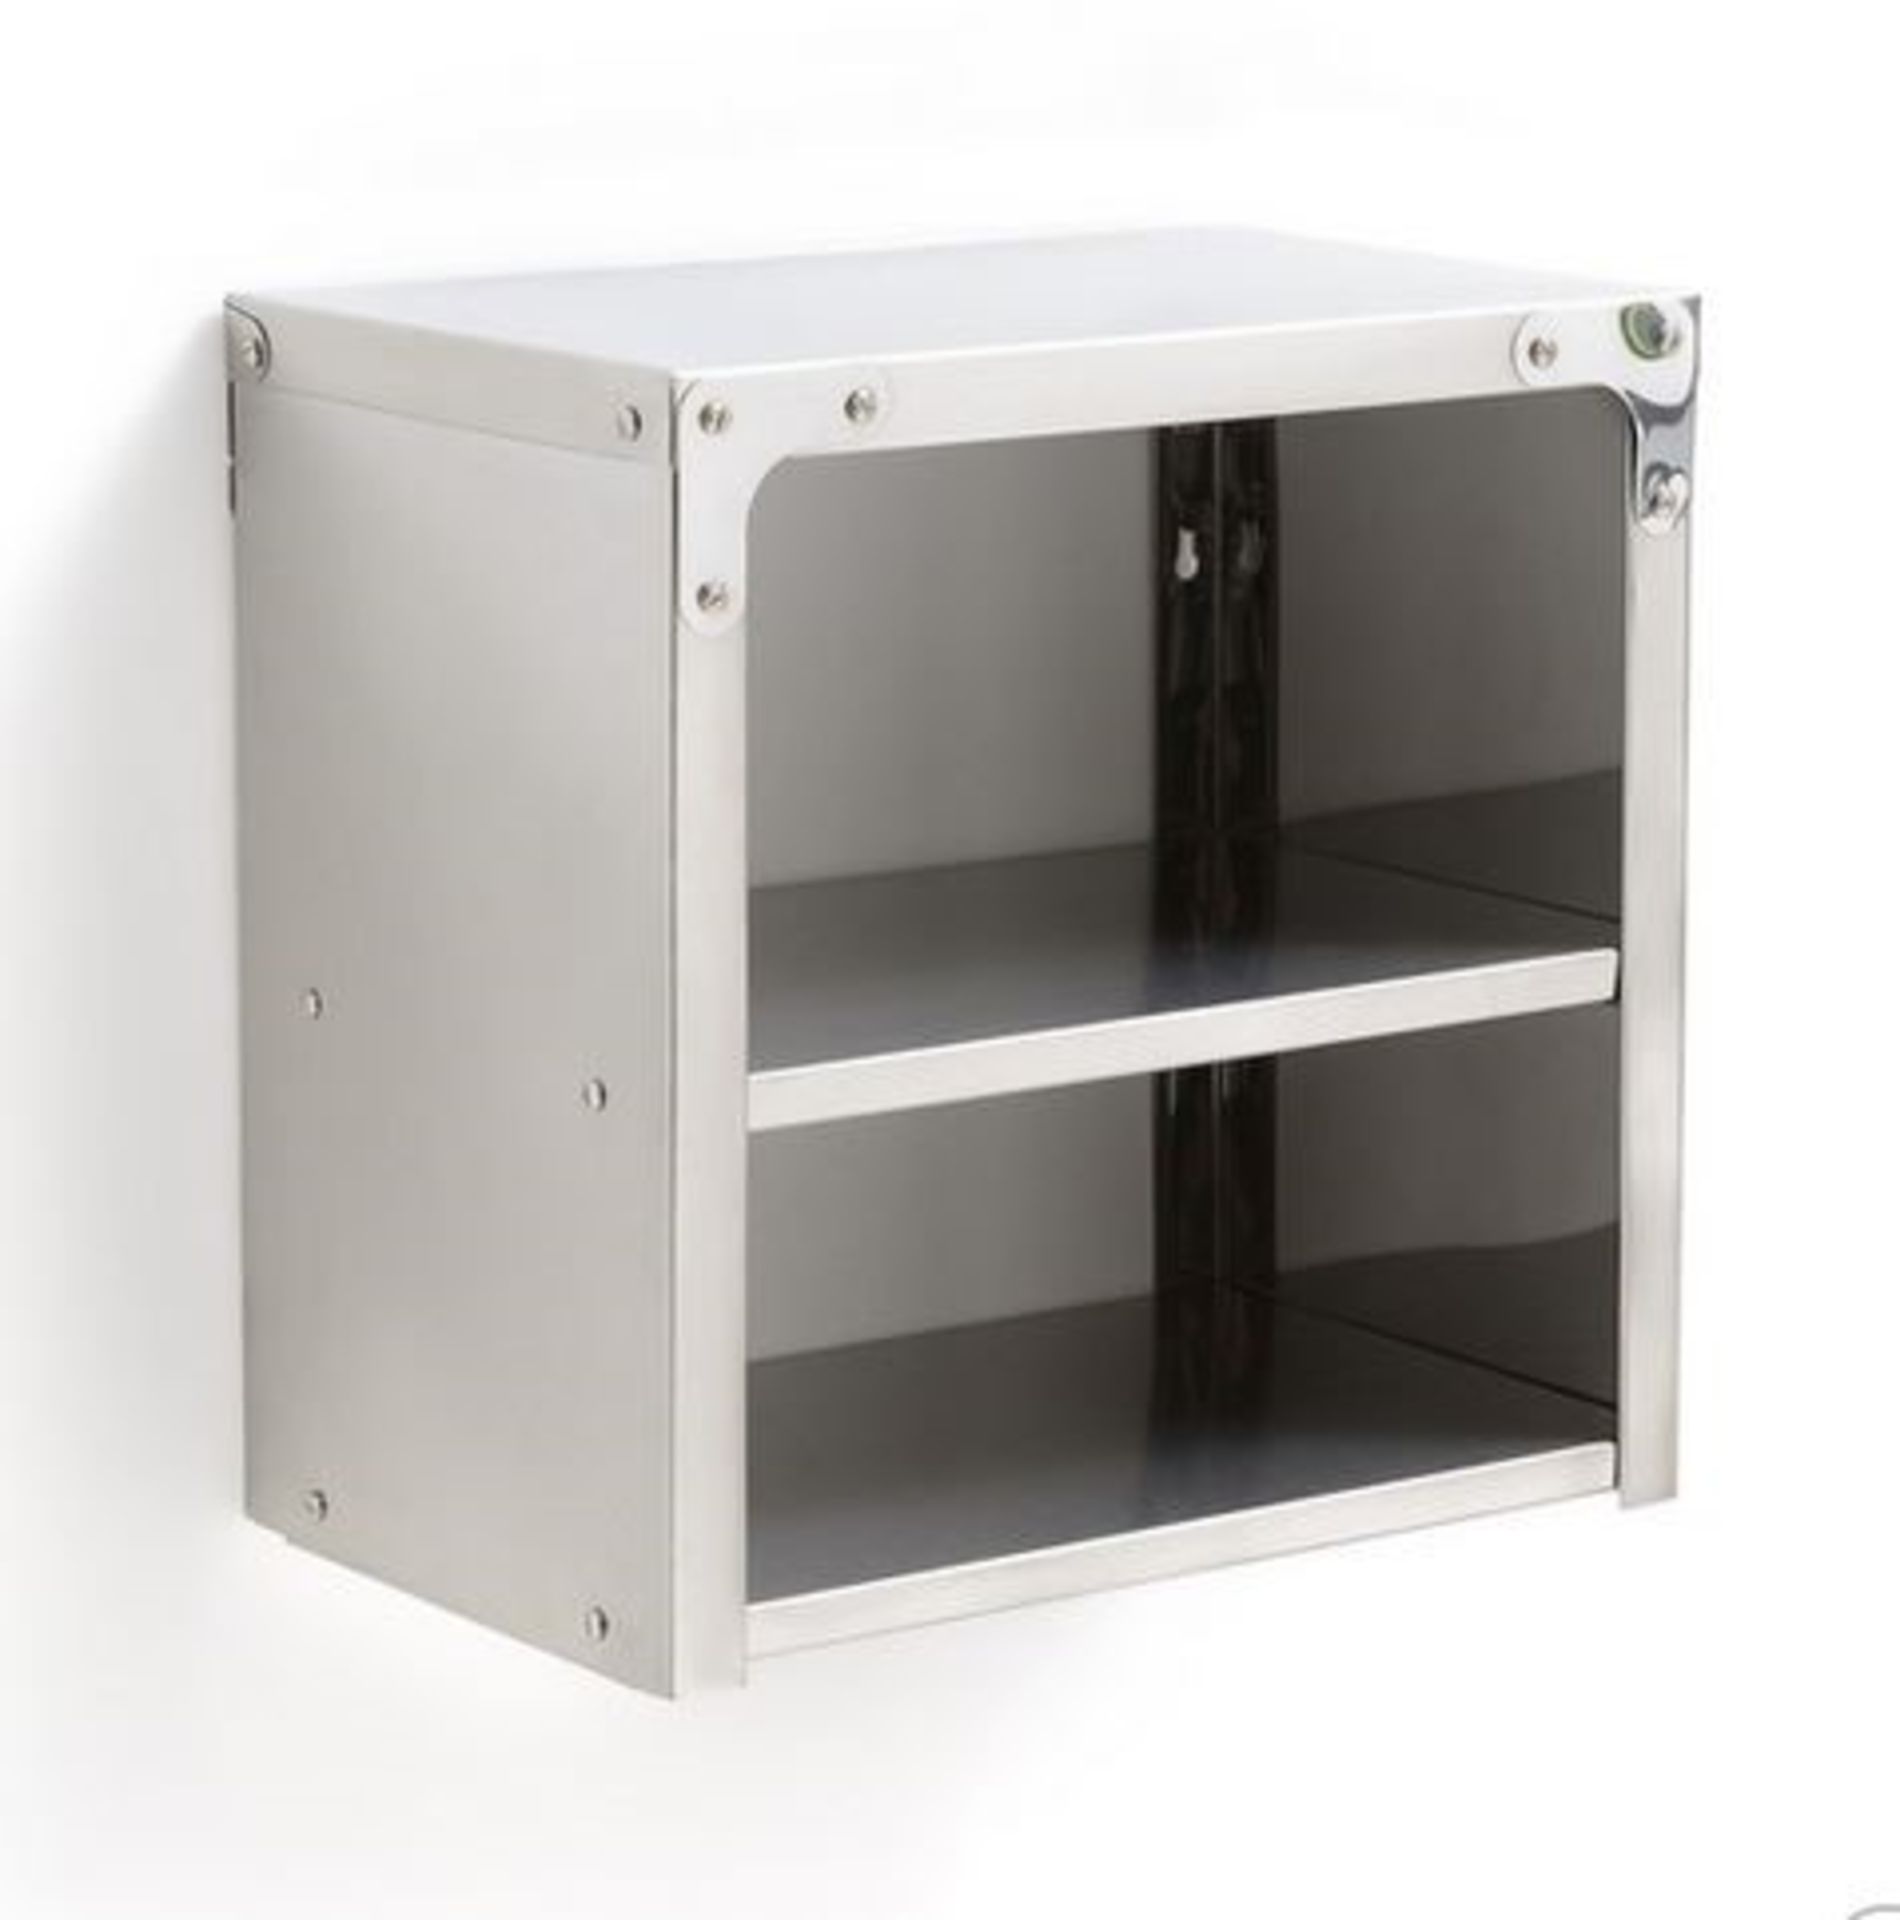 1 BOXED GRADE A, ETAGERE MURALE CHROME SHELF IN WHITE / RRP £155.00 (PUBLIC VIEWING AVAILABLE)